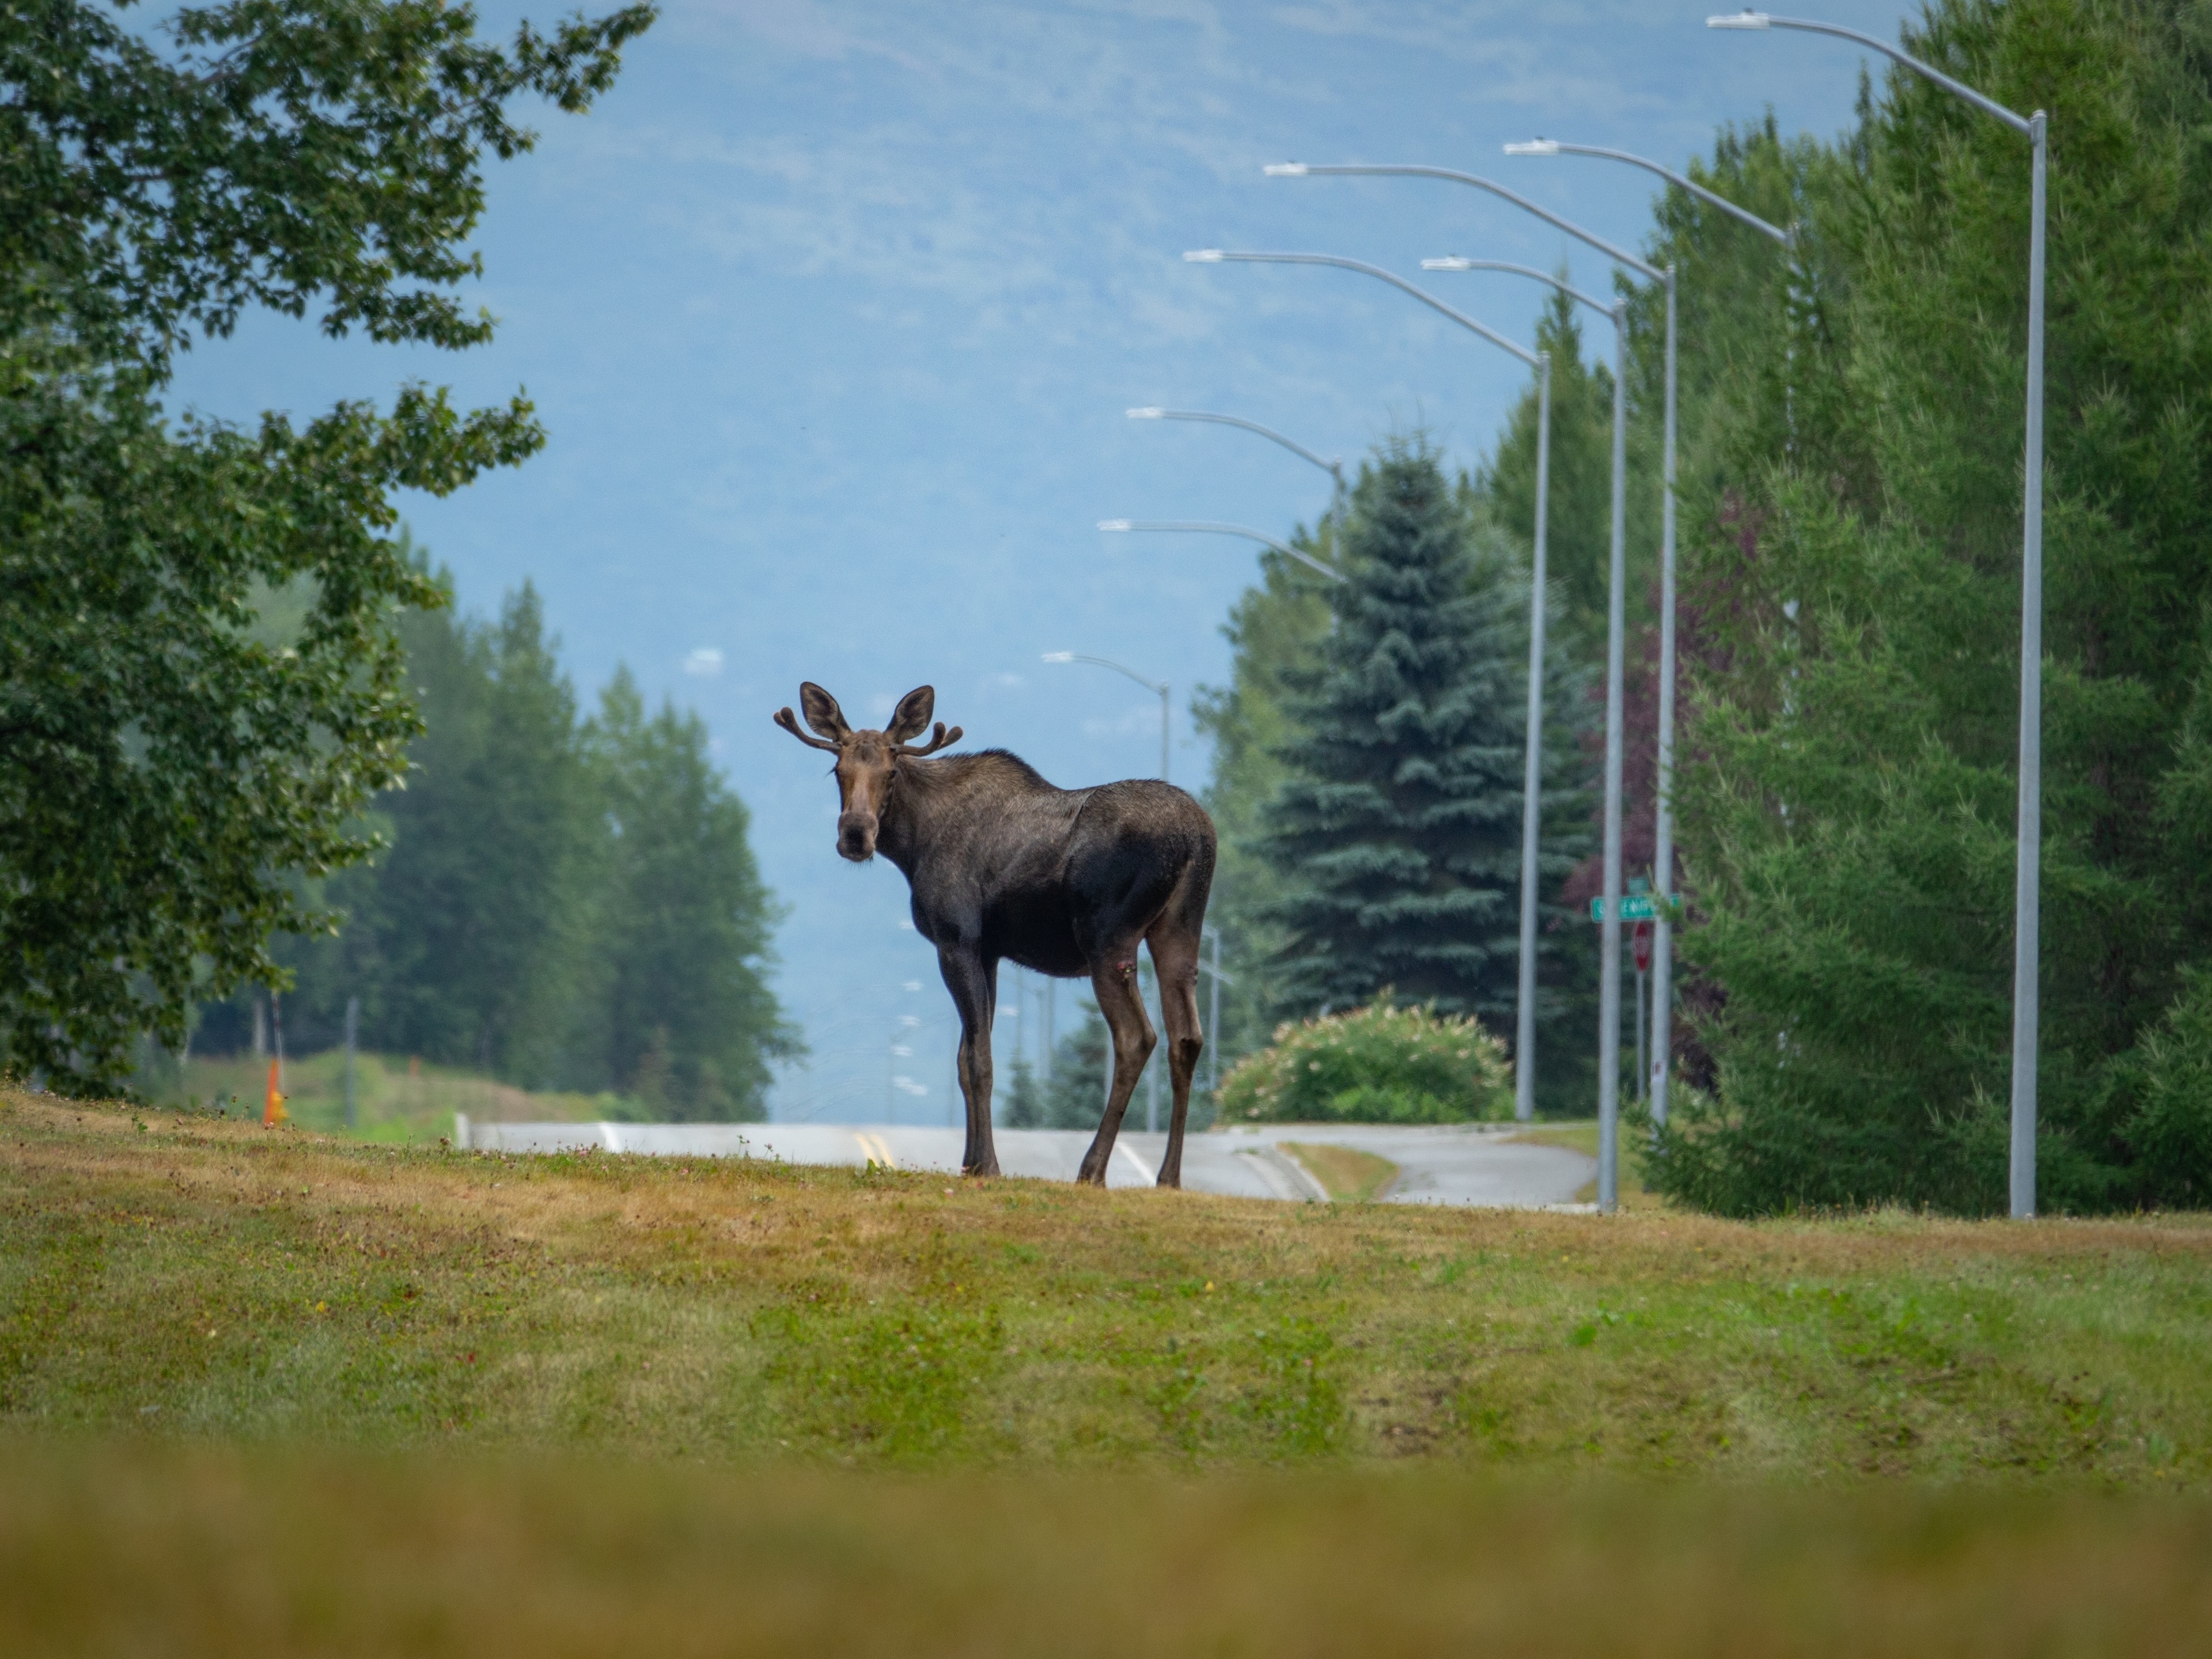 Moose on the loose!  Take a hike near the airport in Anchorage and you likely will see a moose or two.  Kincaid Park is a true gem.